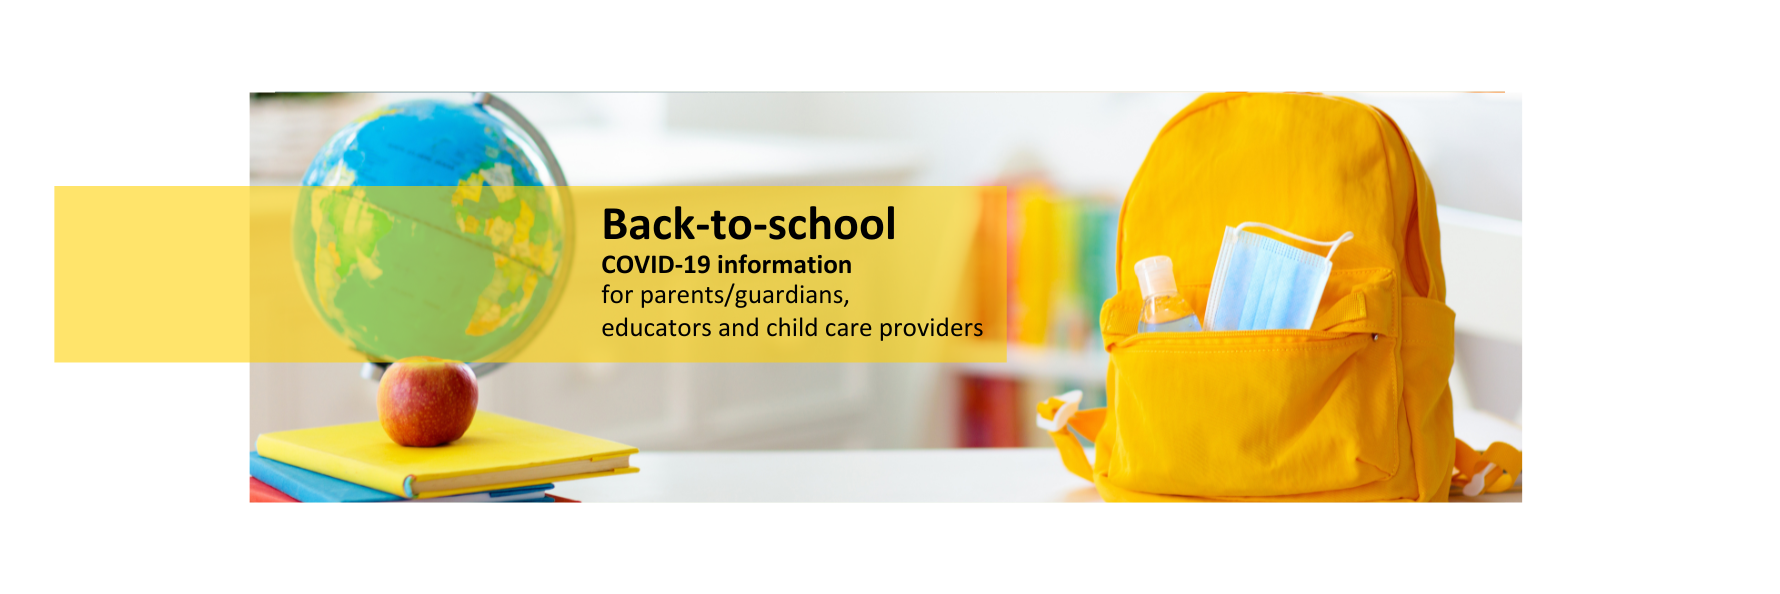 Image of a backpack with a mask and hand sanitizer in its pockets. Text: Back-to-school COVID-19 information for parents/guardians, educators and child care providers